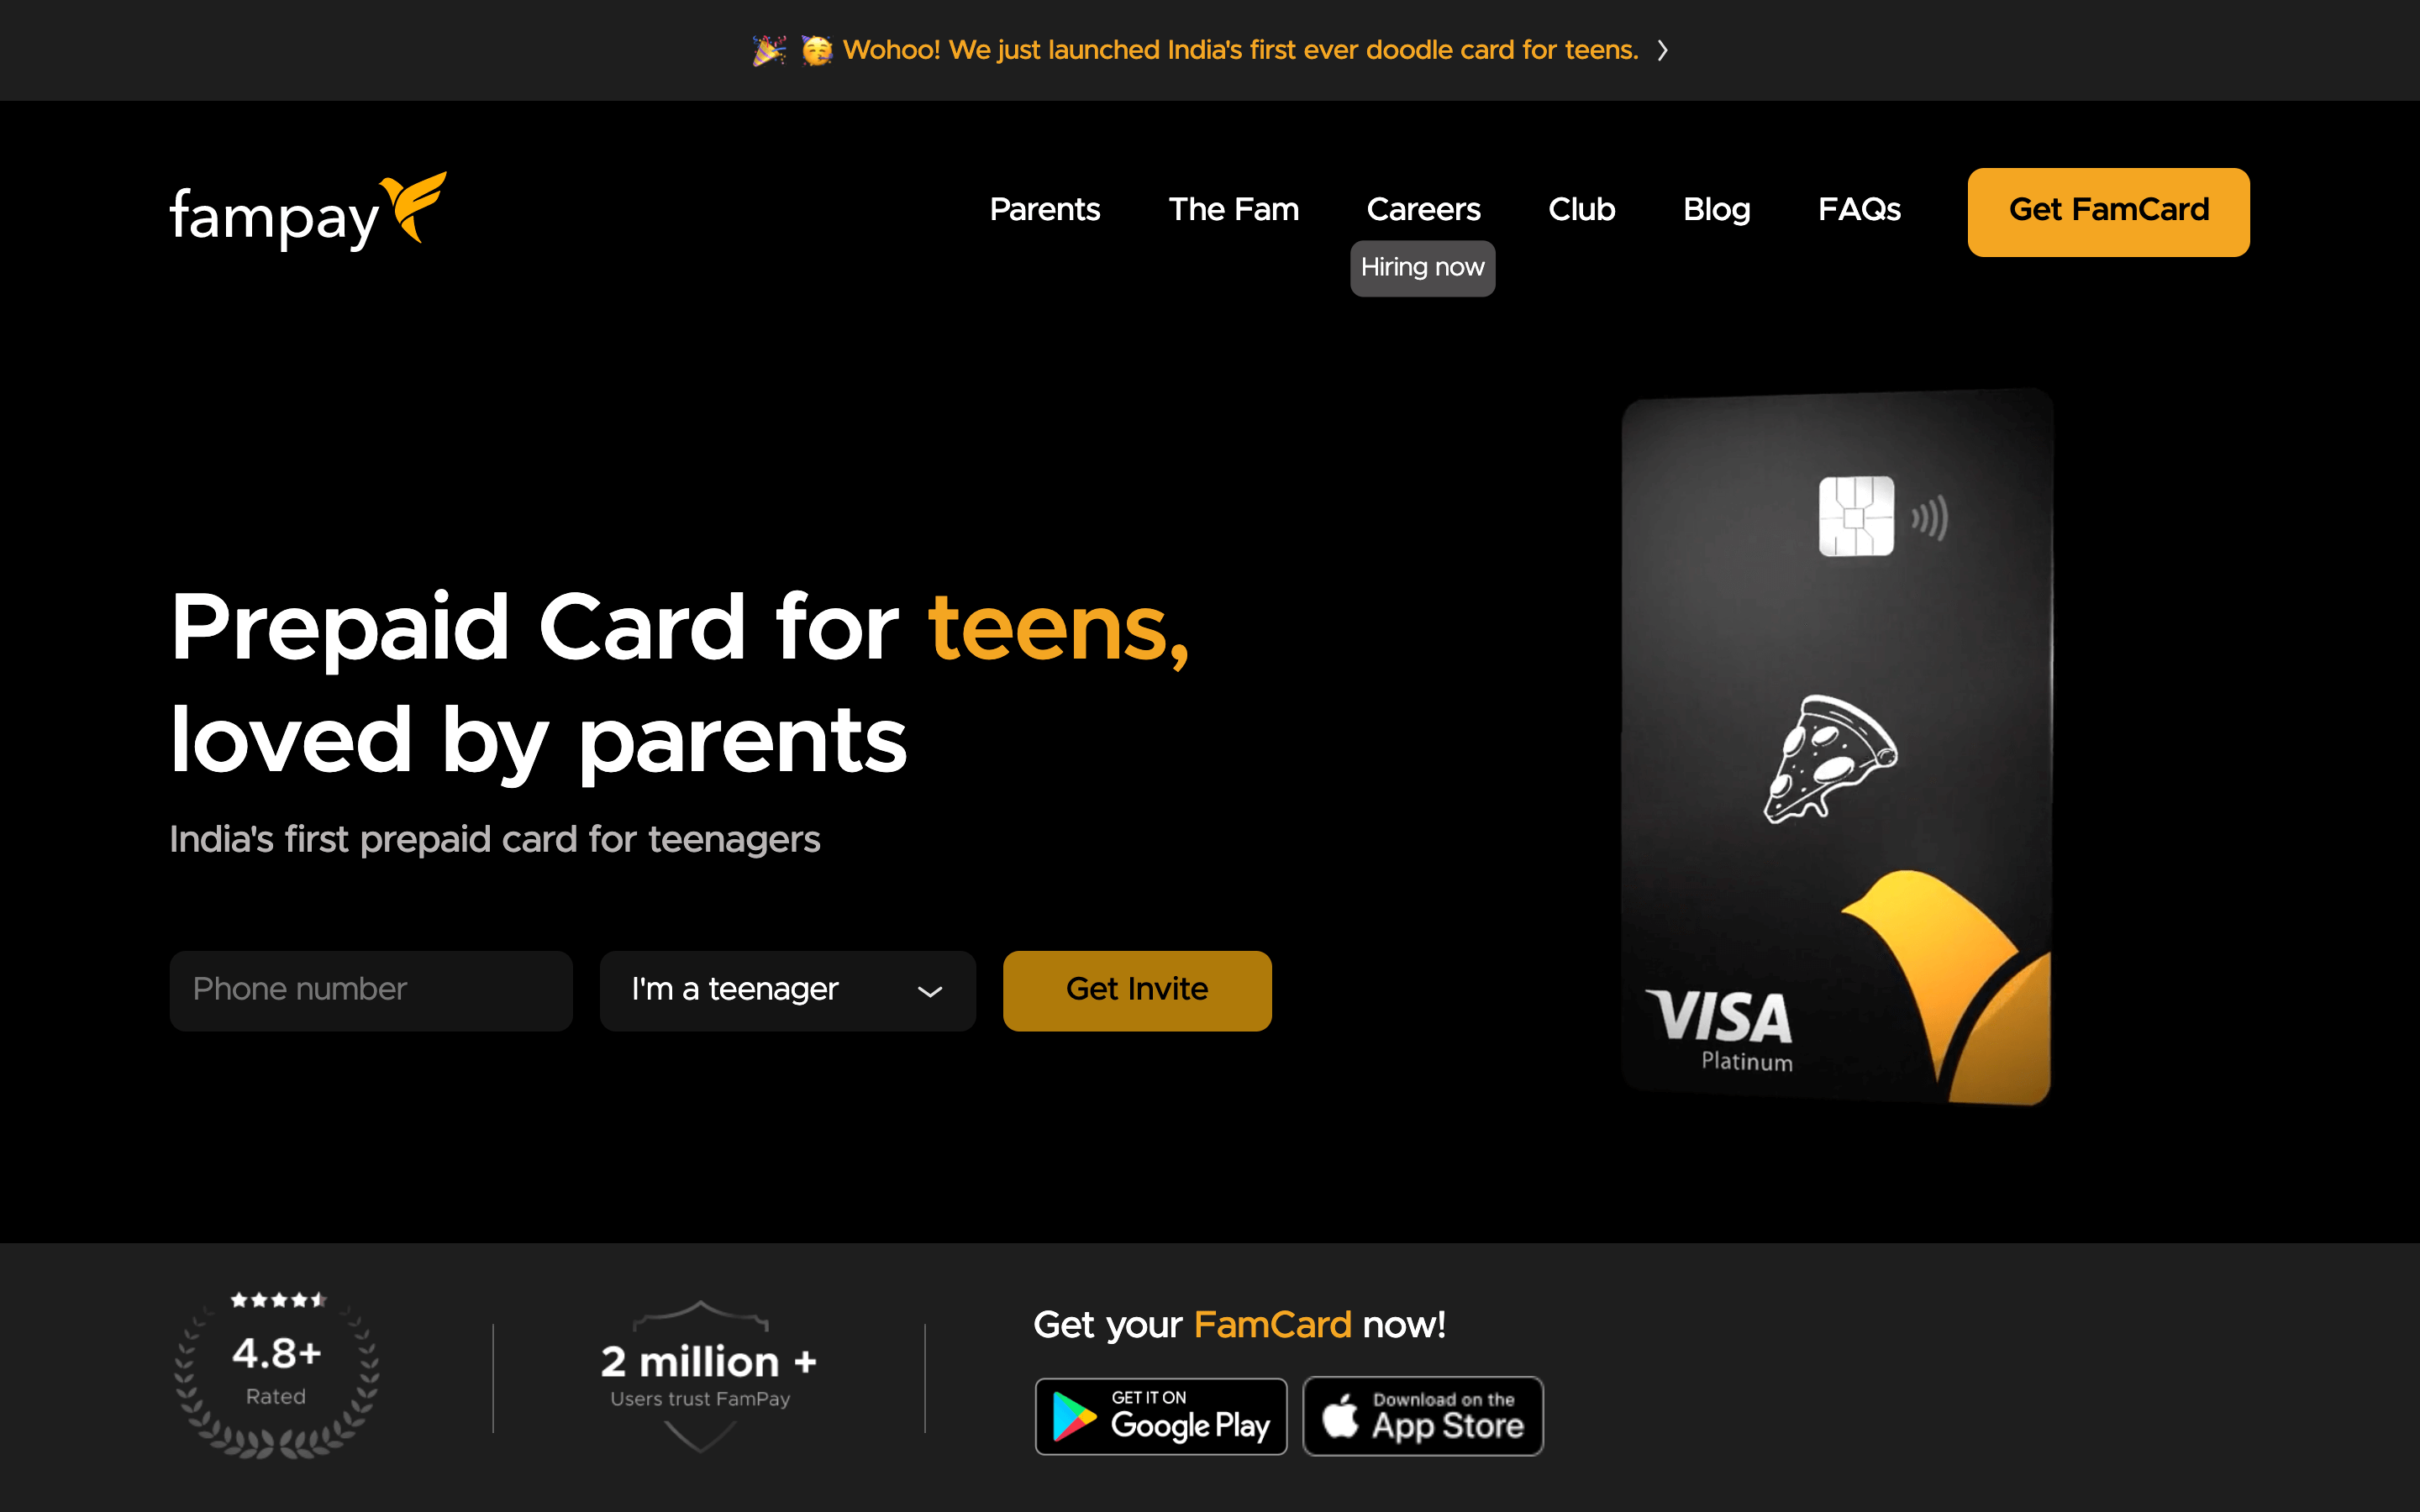 FamPay is India's 1st neobanking app for teens.